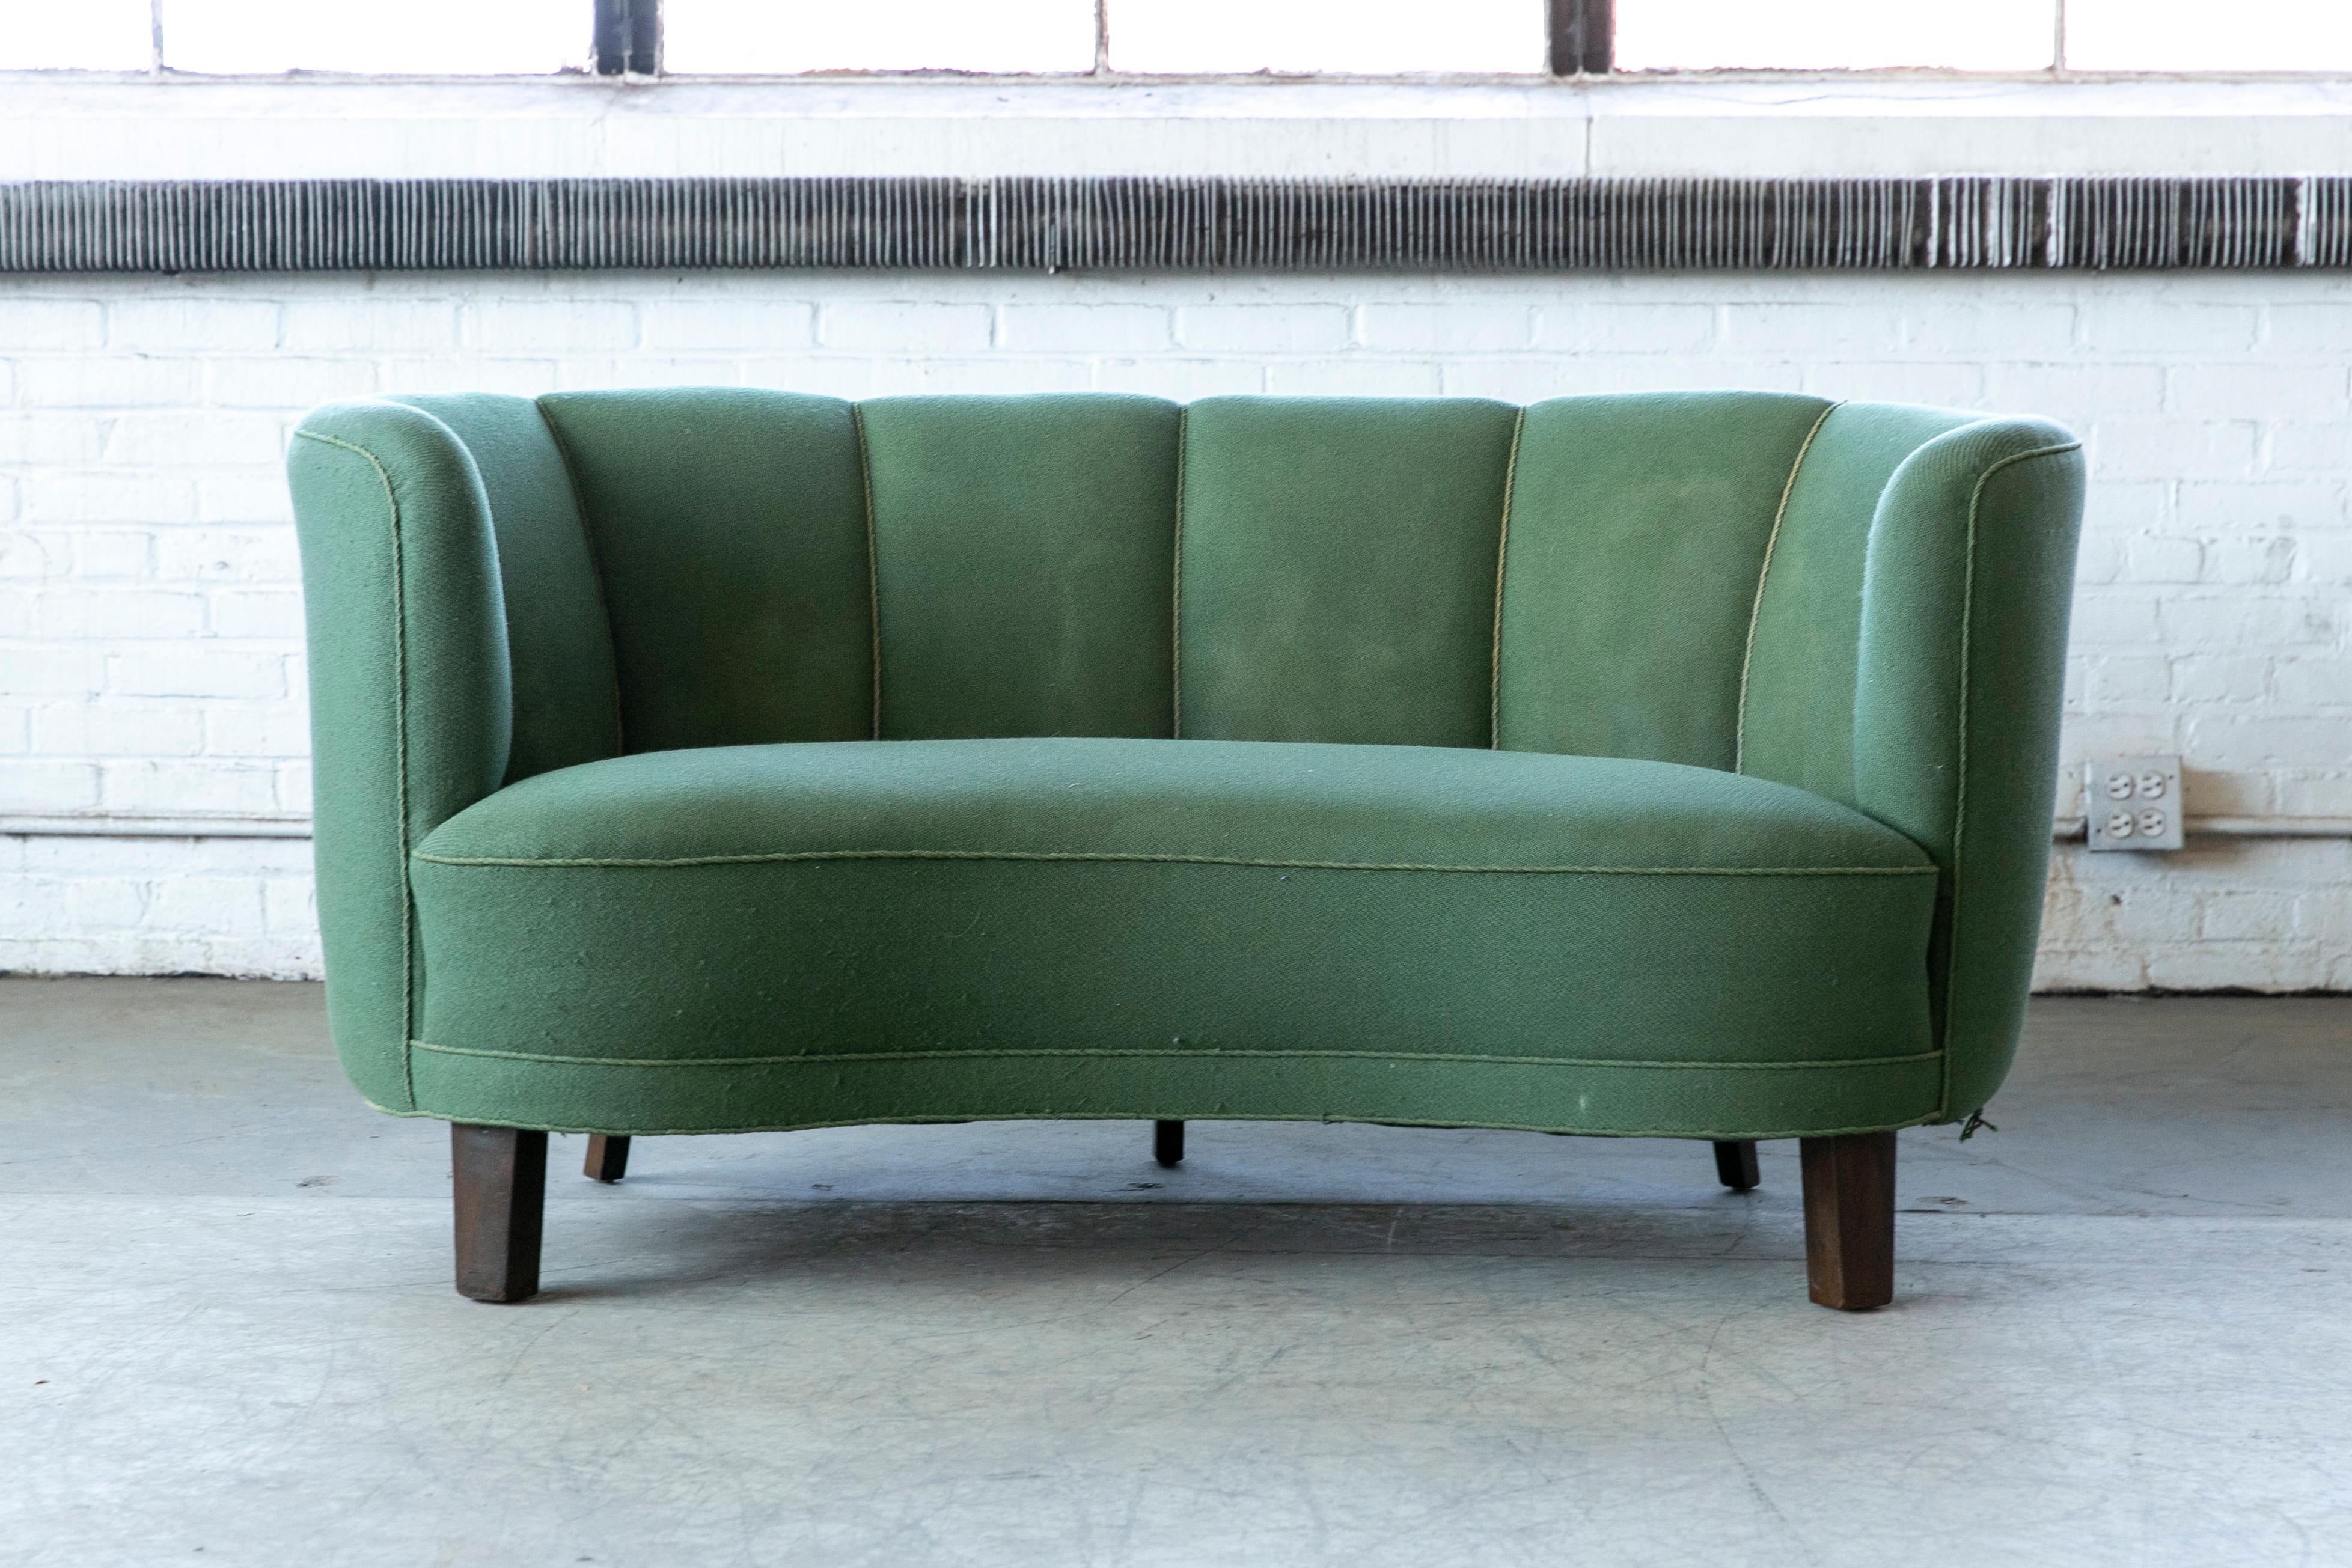 Beautiful and very elegant 1940s curved two-seat sofa or loveseat in green wool fabric. This sofa has slightly taller legs indicating a production date closer to 1950 when taller legs became more popular. The sofa has springs in the seat and the